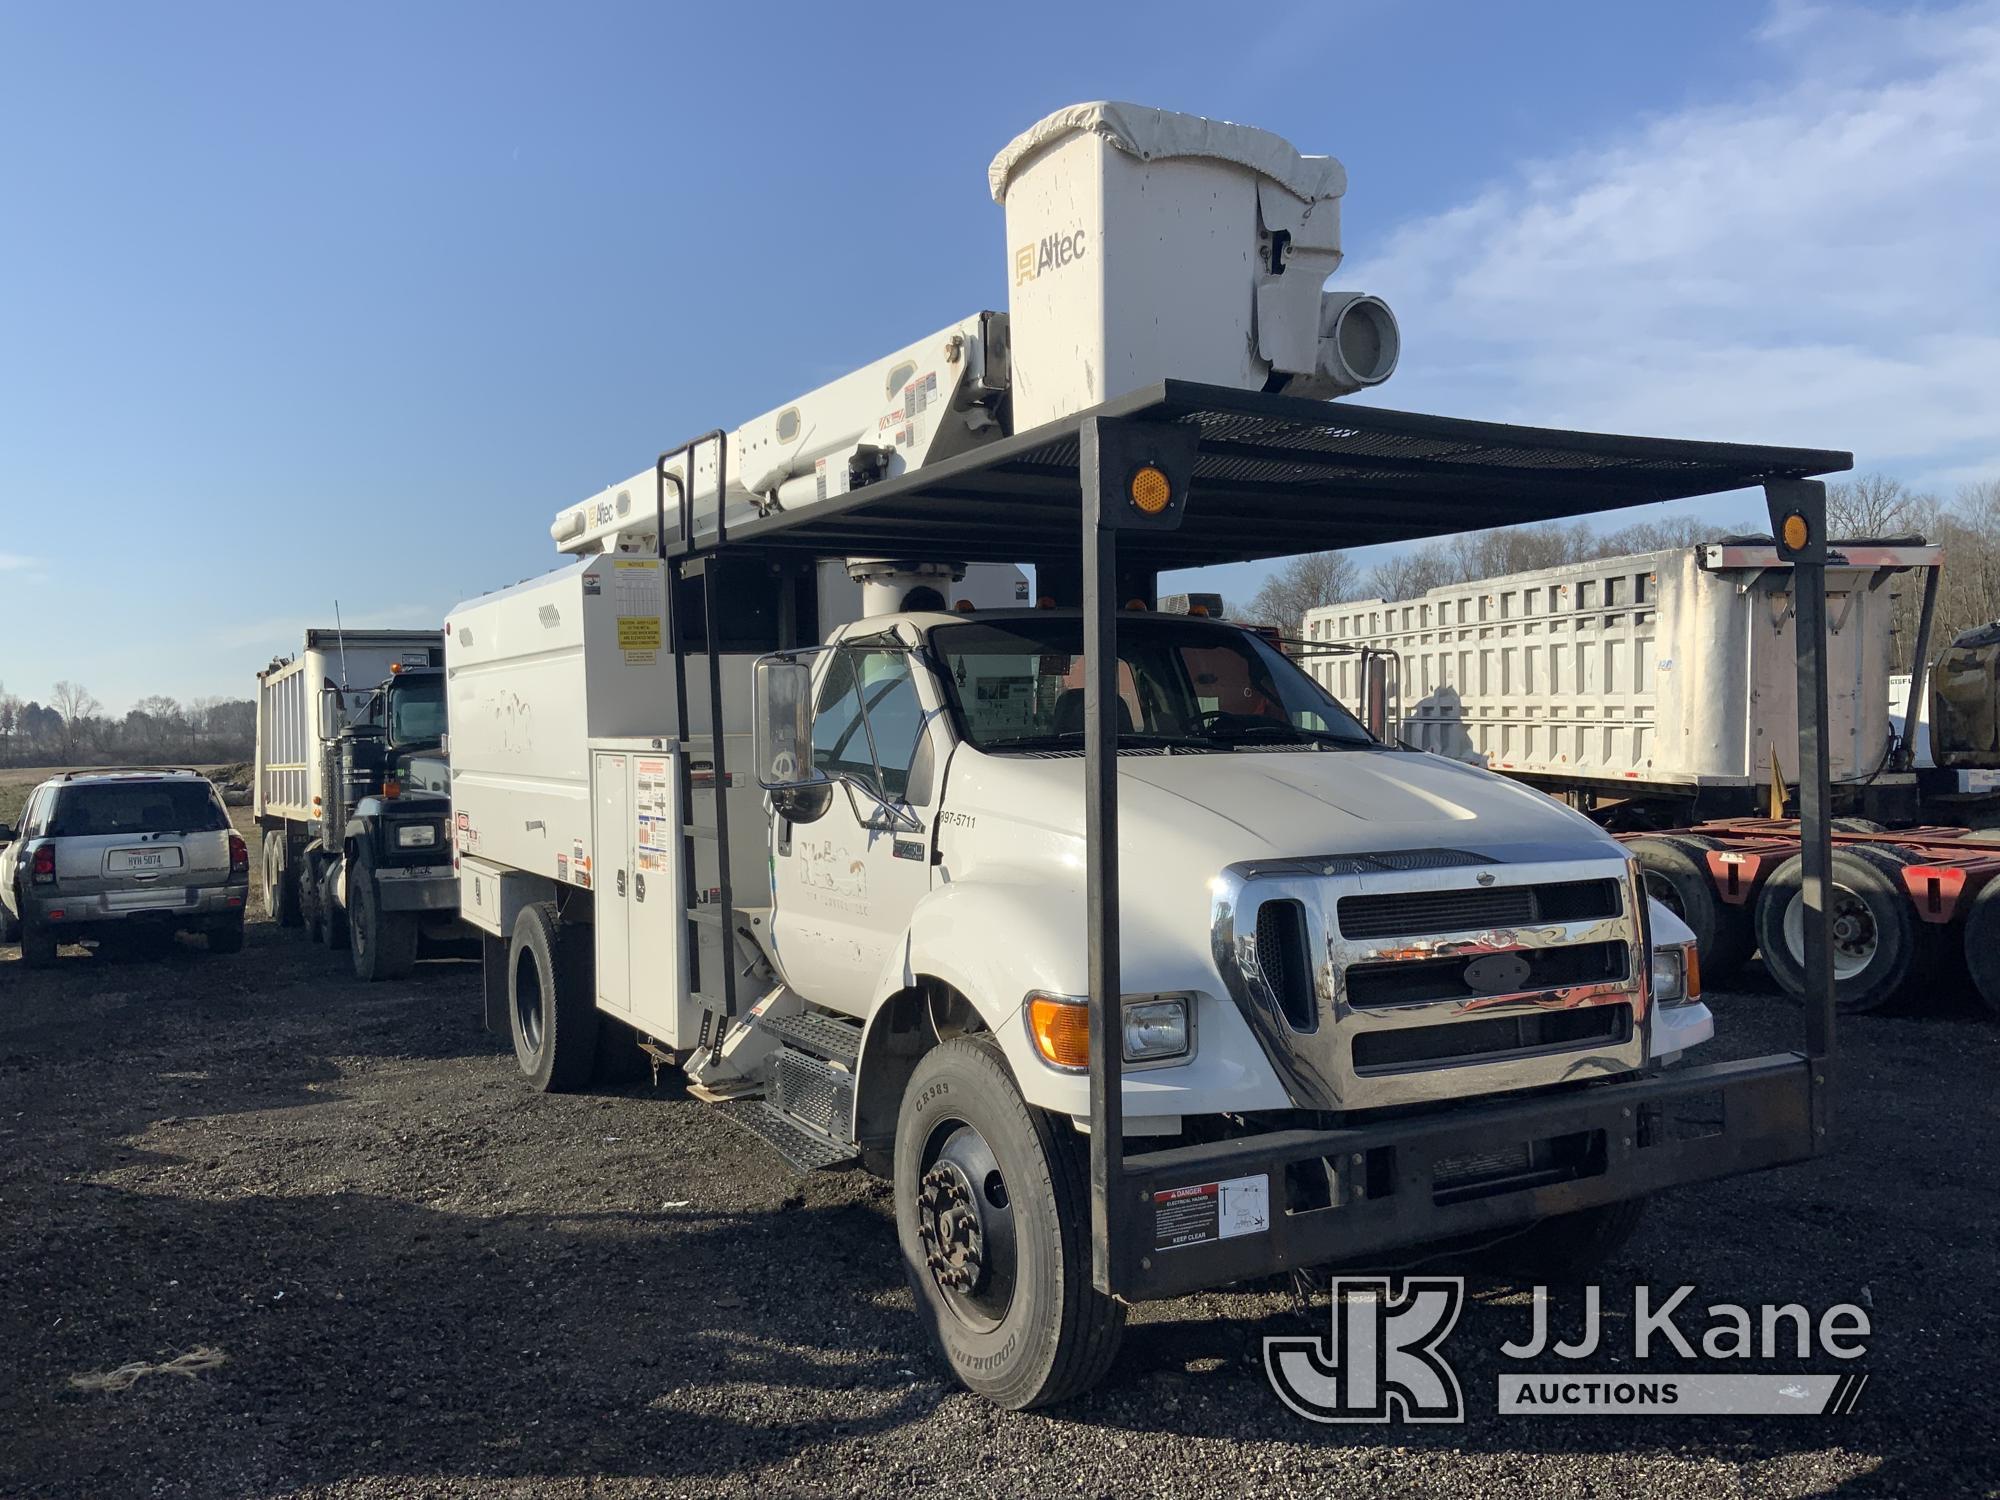 (Ashland, OH) Altec LR756, Over-Center Bucket Truck mounted behind cab on 2015 Ford F750 Chipper Dum